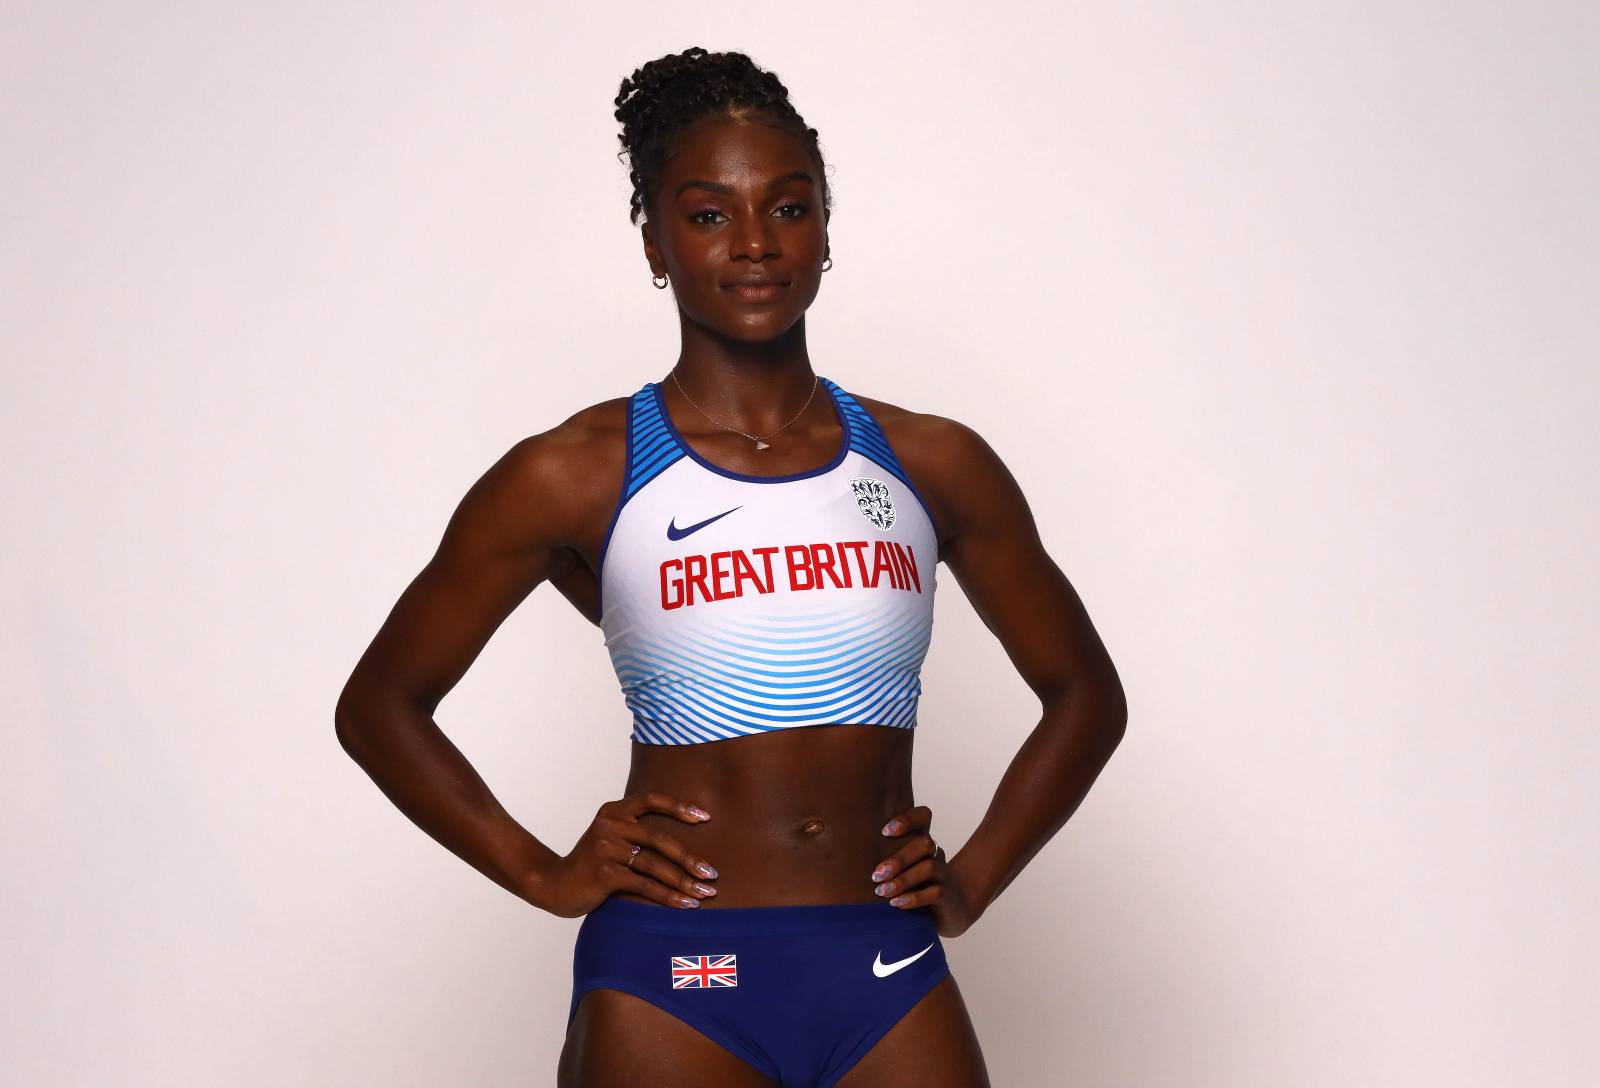 Dina Asher-Smith /(Fot. Getty Images)